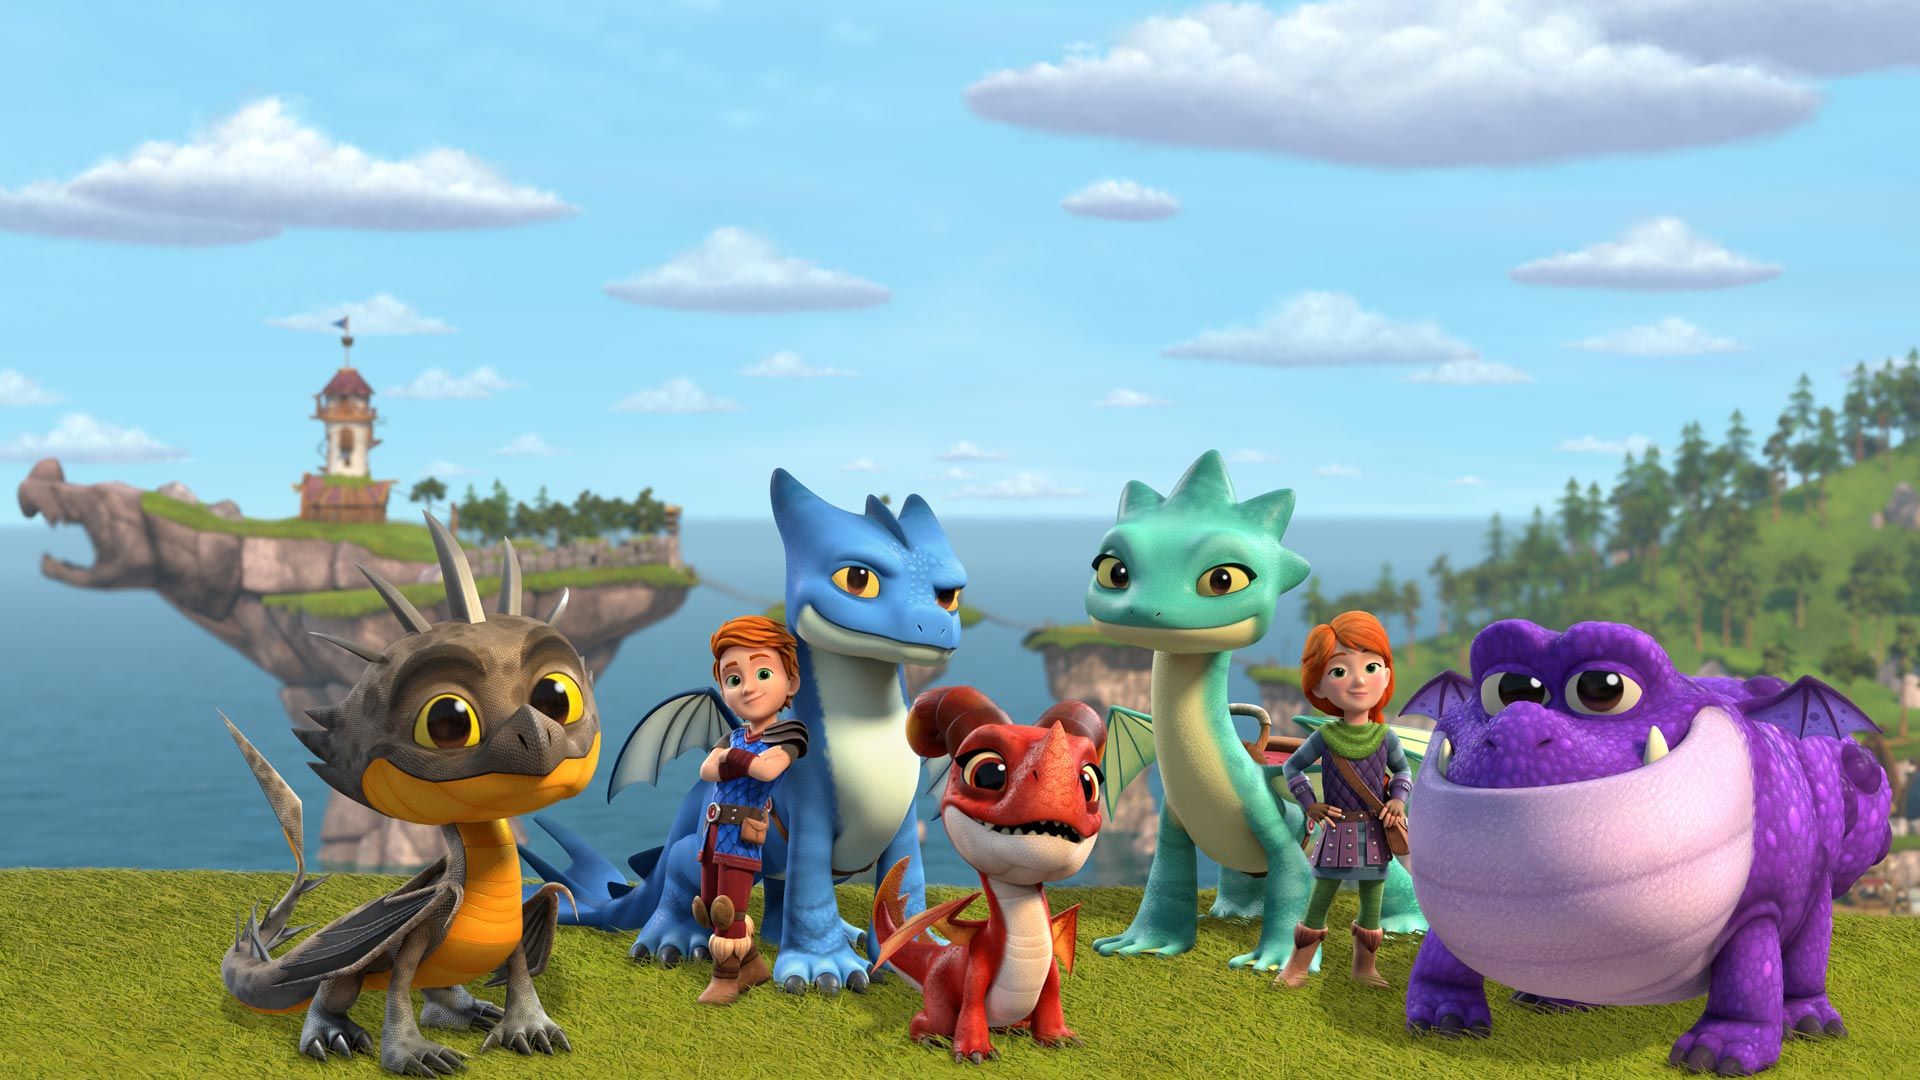 WATCH: Exclusive Clip from DreamWorks' 'Dragons Rescue Riders